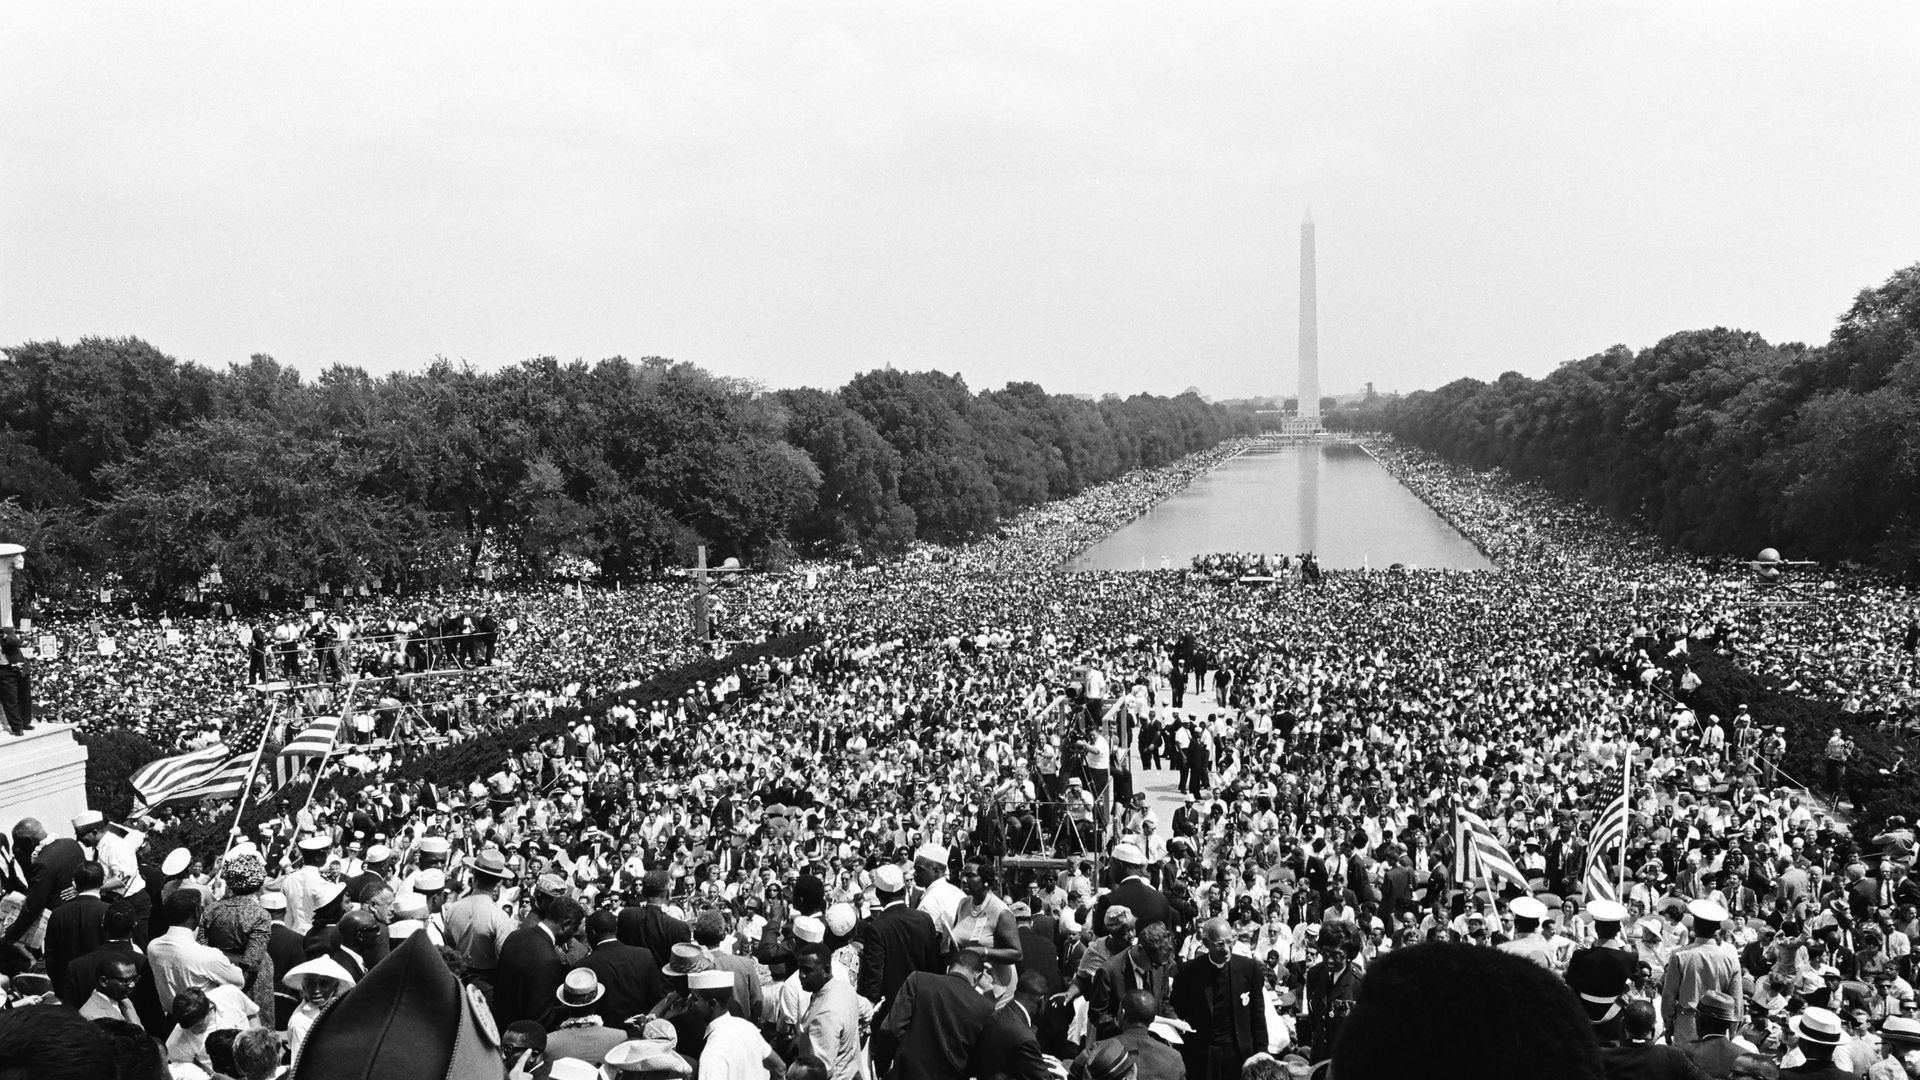 A look back at the March on Washington in 1963